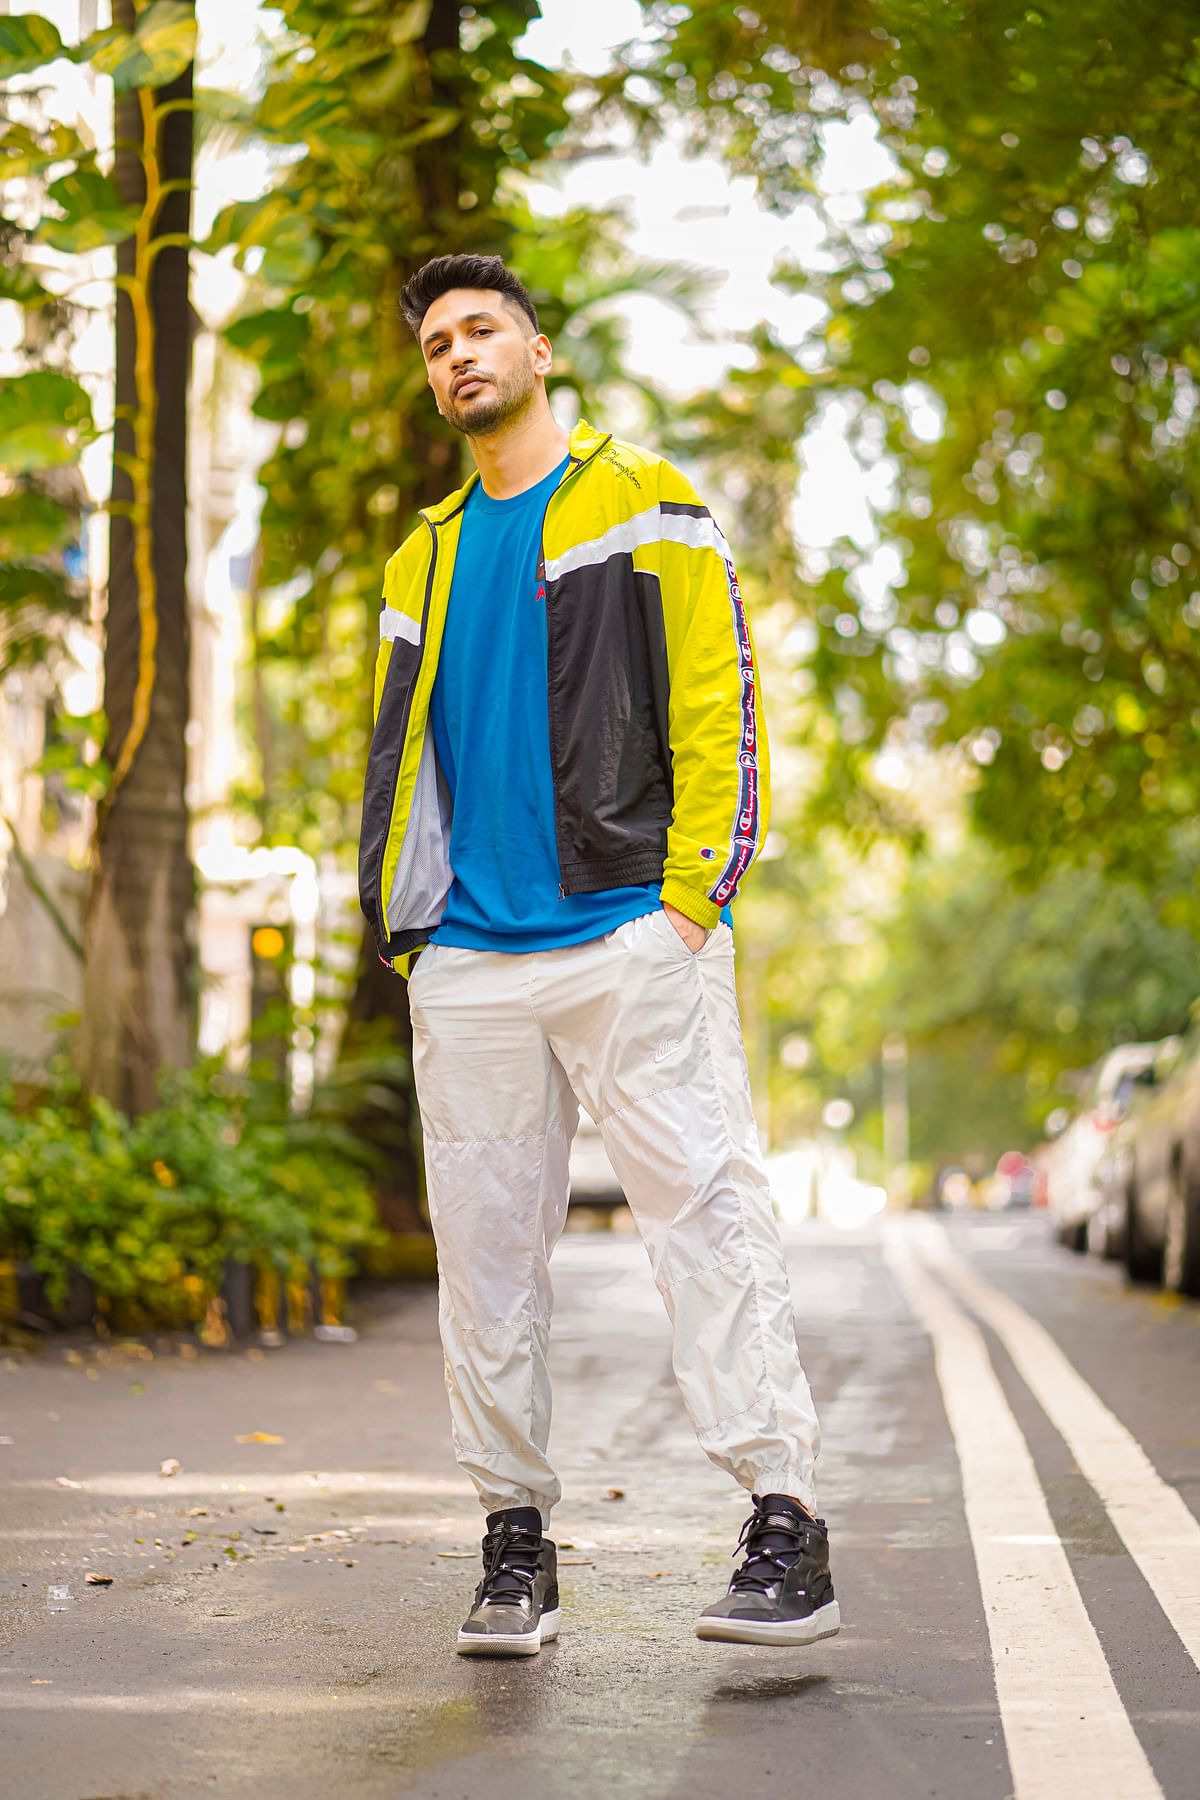 Every song is a collaboration: Arjun Kanungo